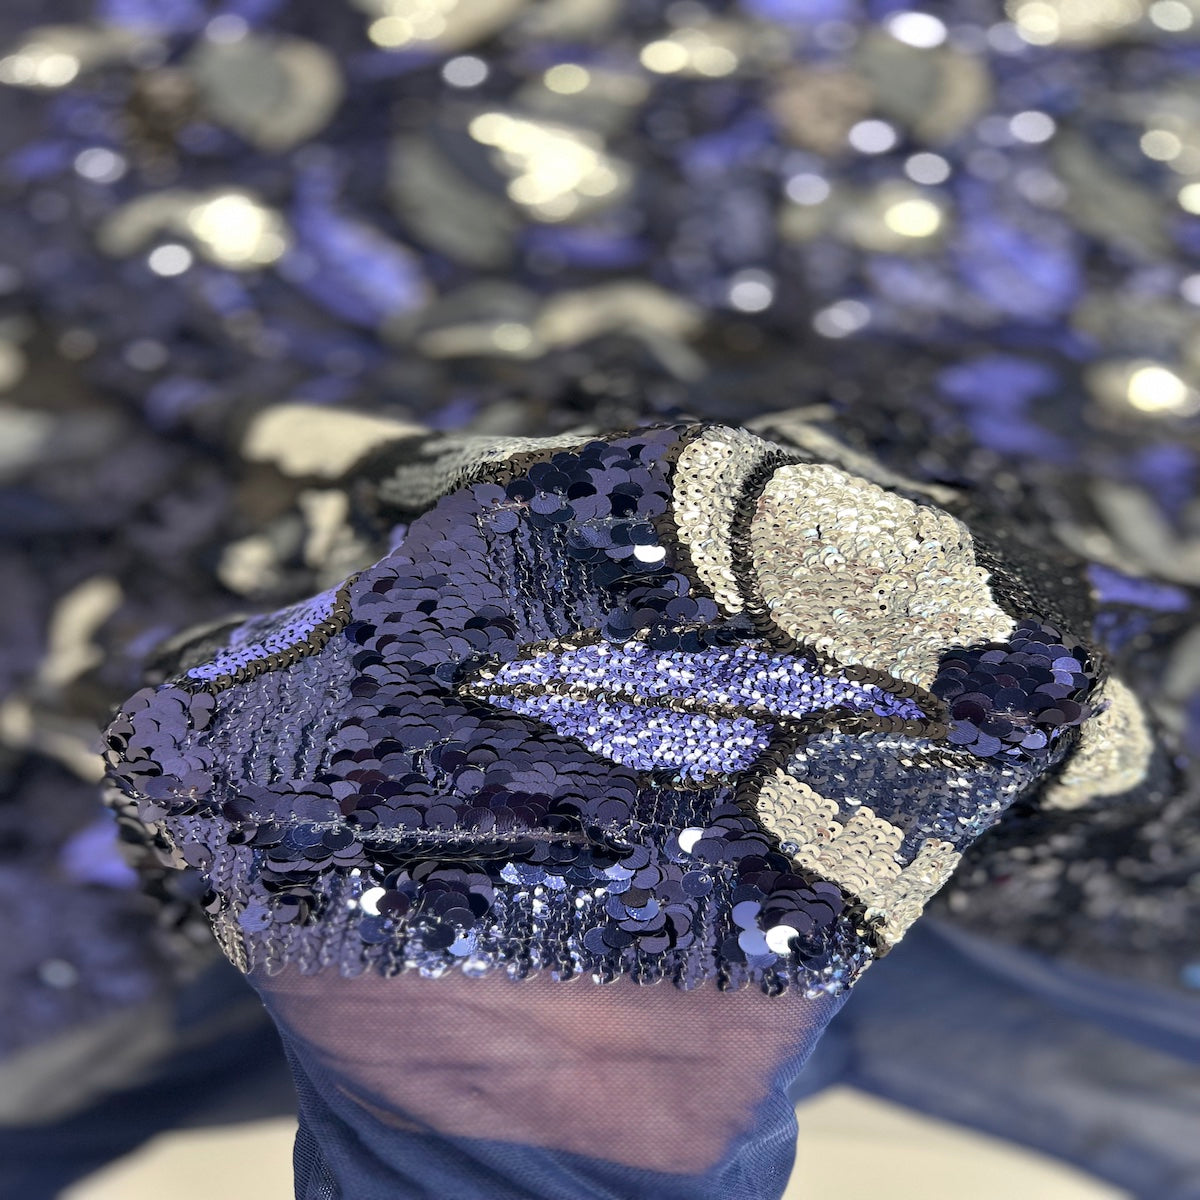 Navy Blue Giselle Multicolor Floral Sequins Fabric